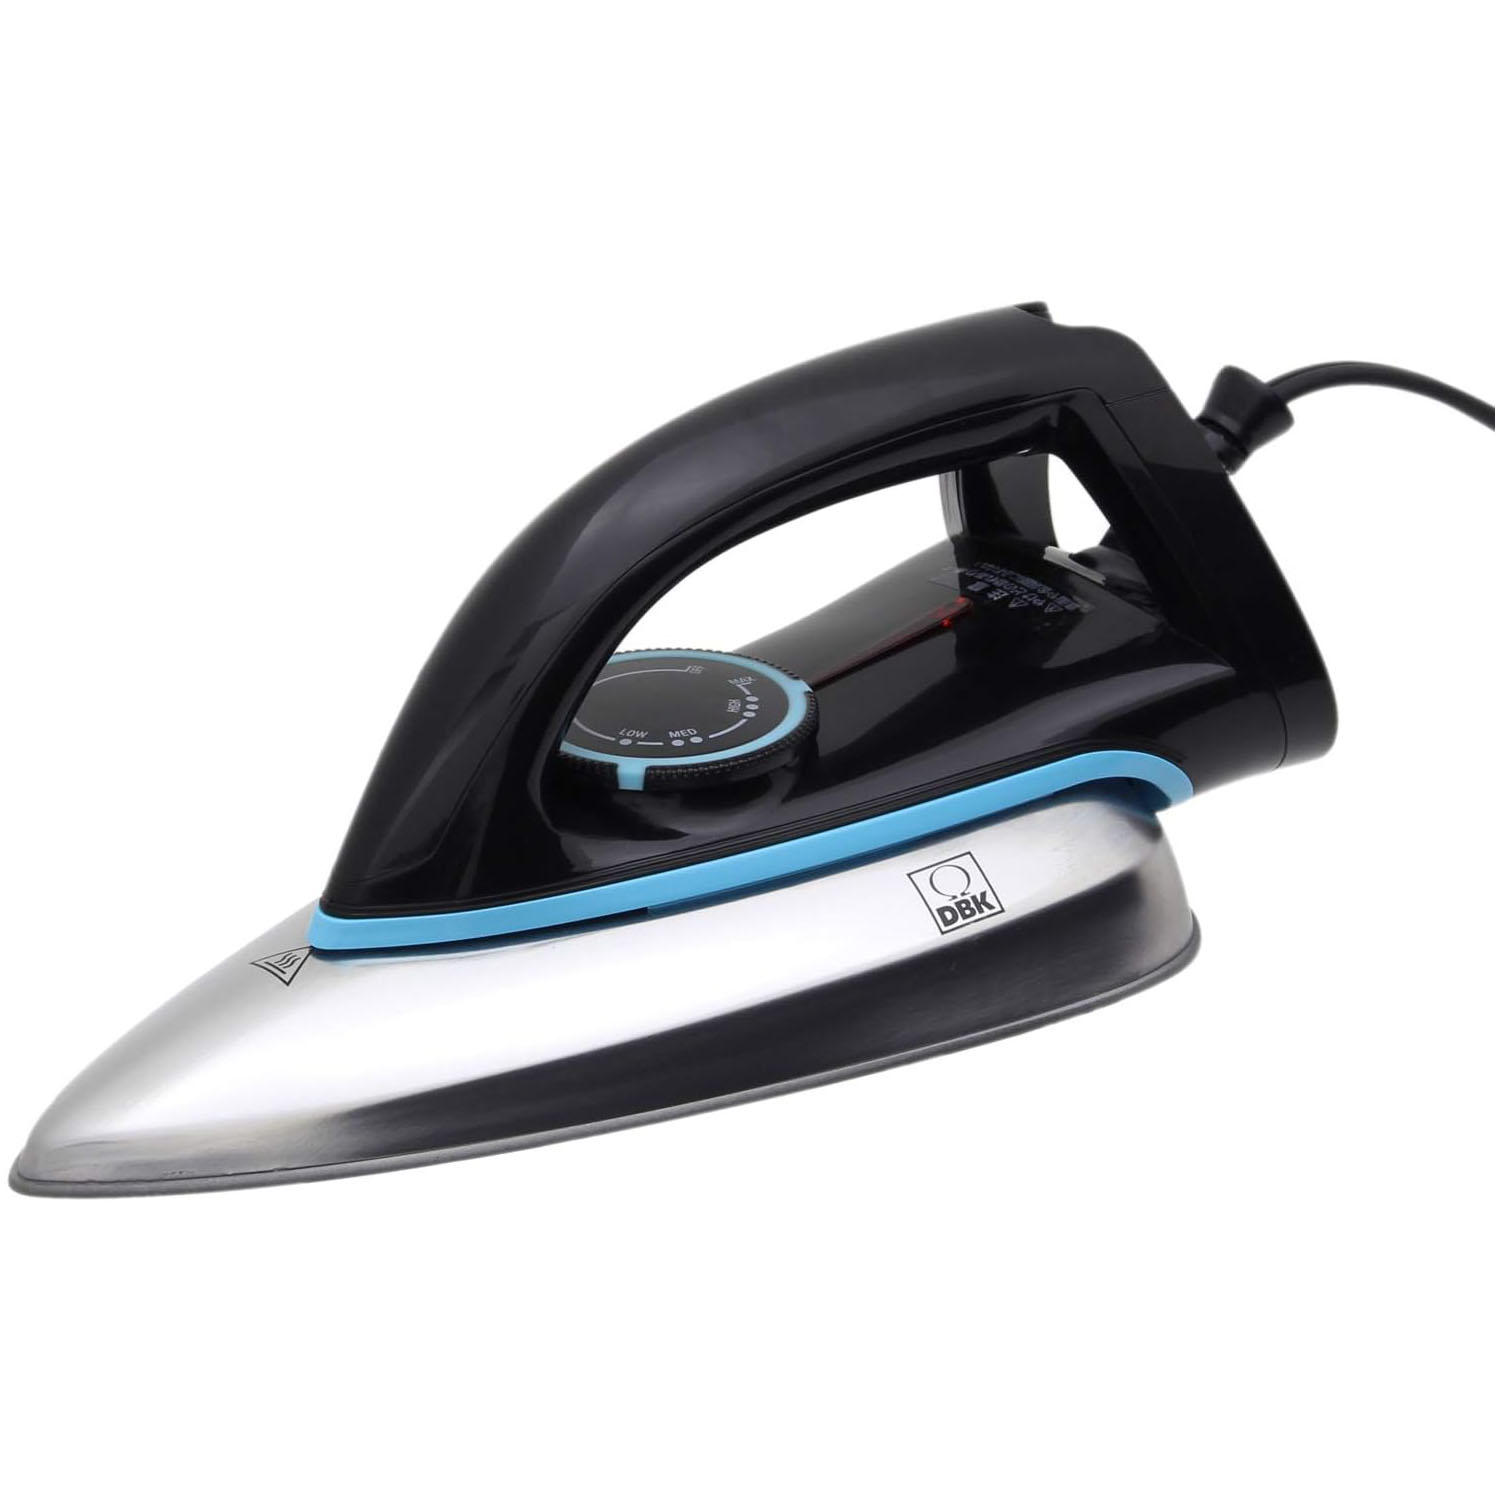 DBK Small Lightweight Dry Iron Corded ”The DRY” (pcs)